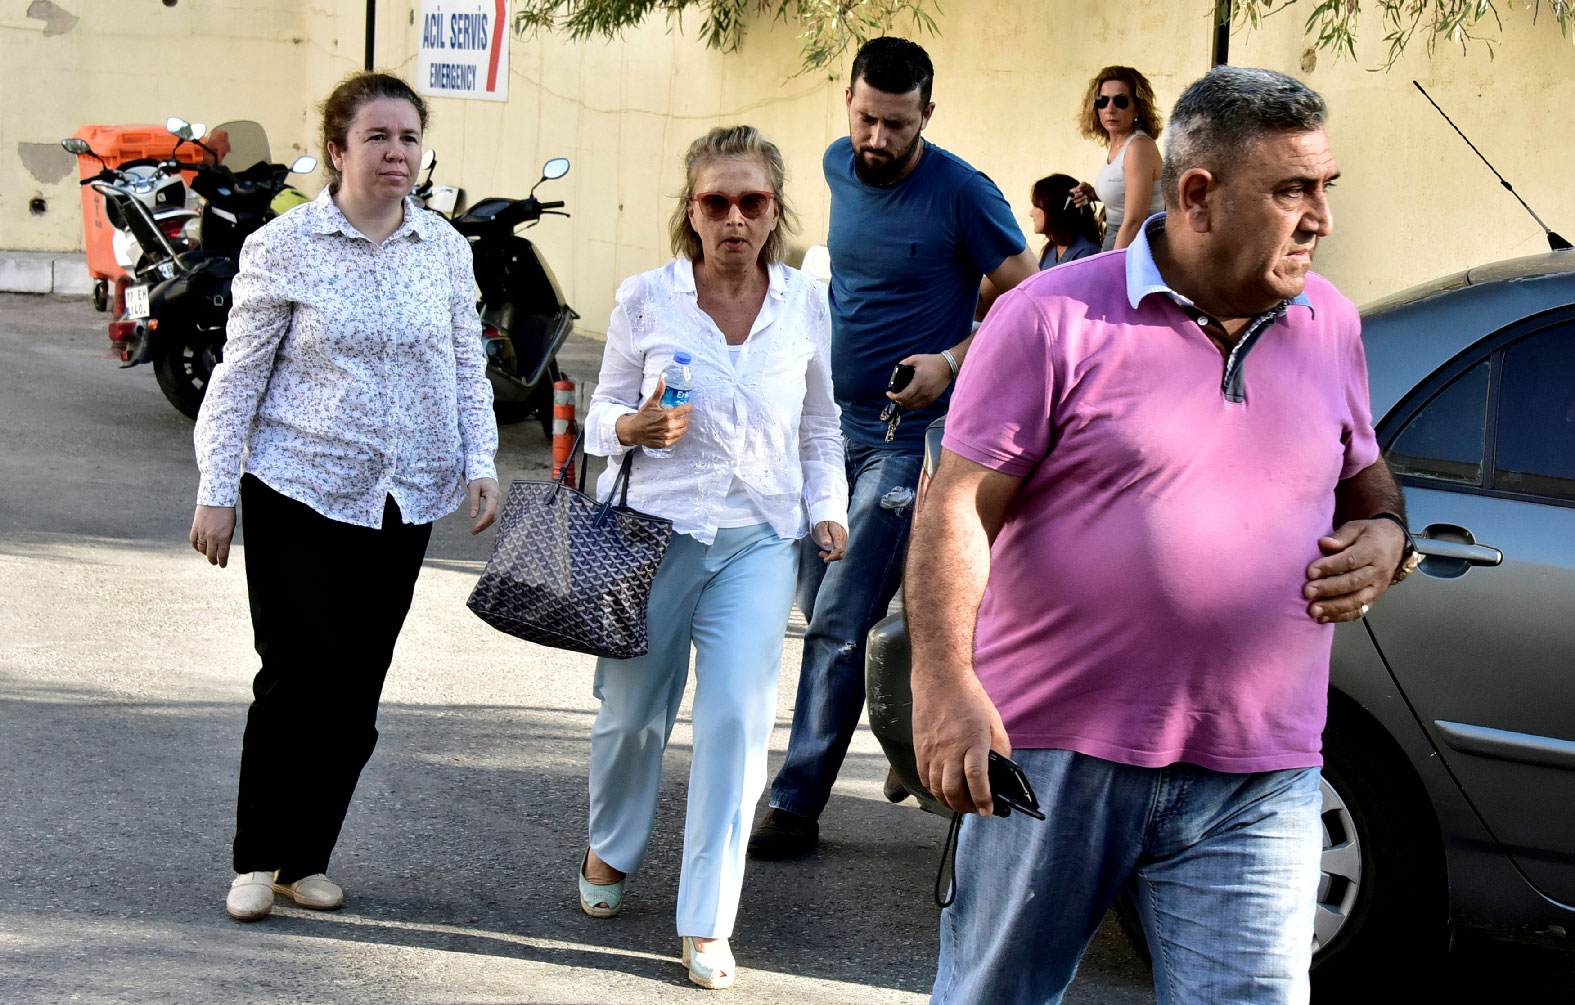 Turkish journalist Nazli Ilicak (C), also a well-known commentator and former parliamentarian, is escorted by a police officer (R) and her relatives (L and rear) after being detained and brought to a hospital for a medical check in Bodrum, Turkey, July 26, 2016.